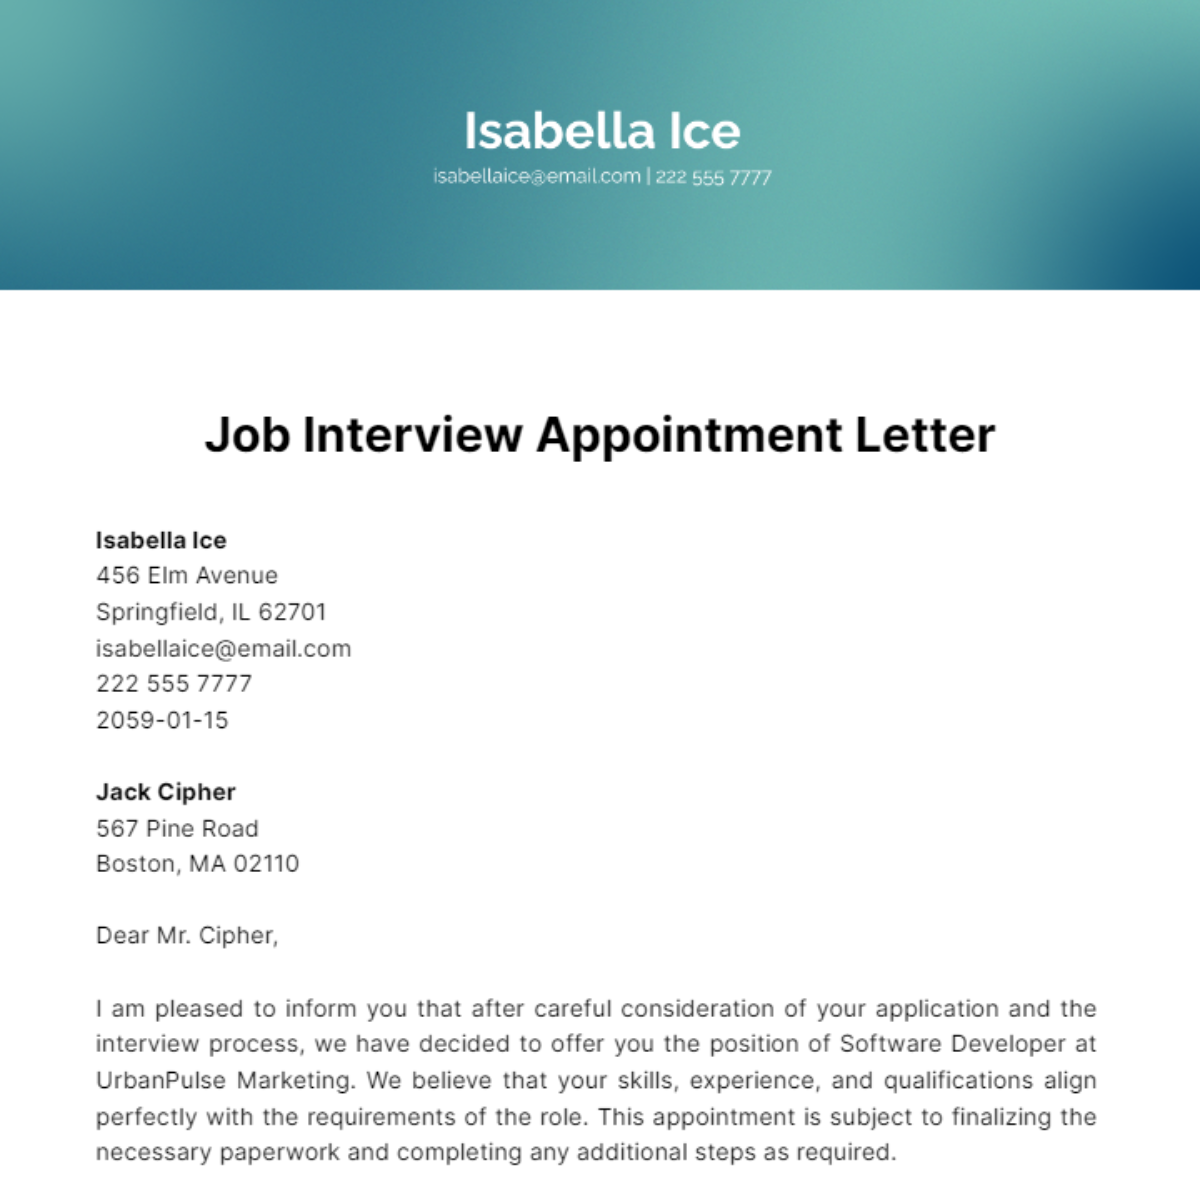 Free Job Interview Appointment Letter Template